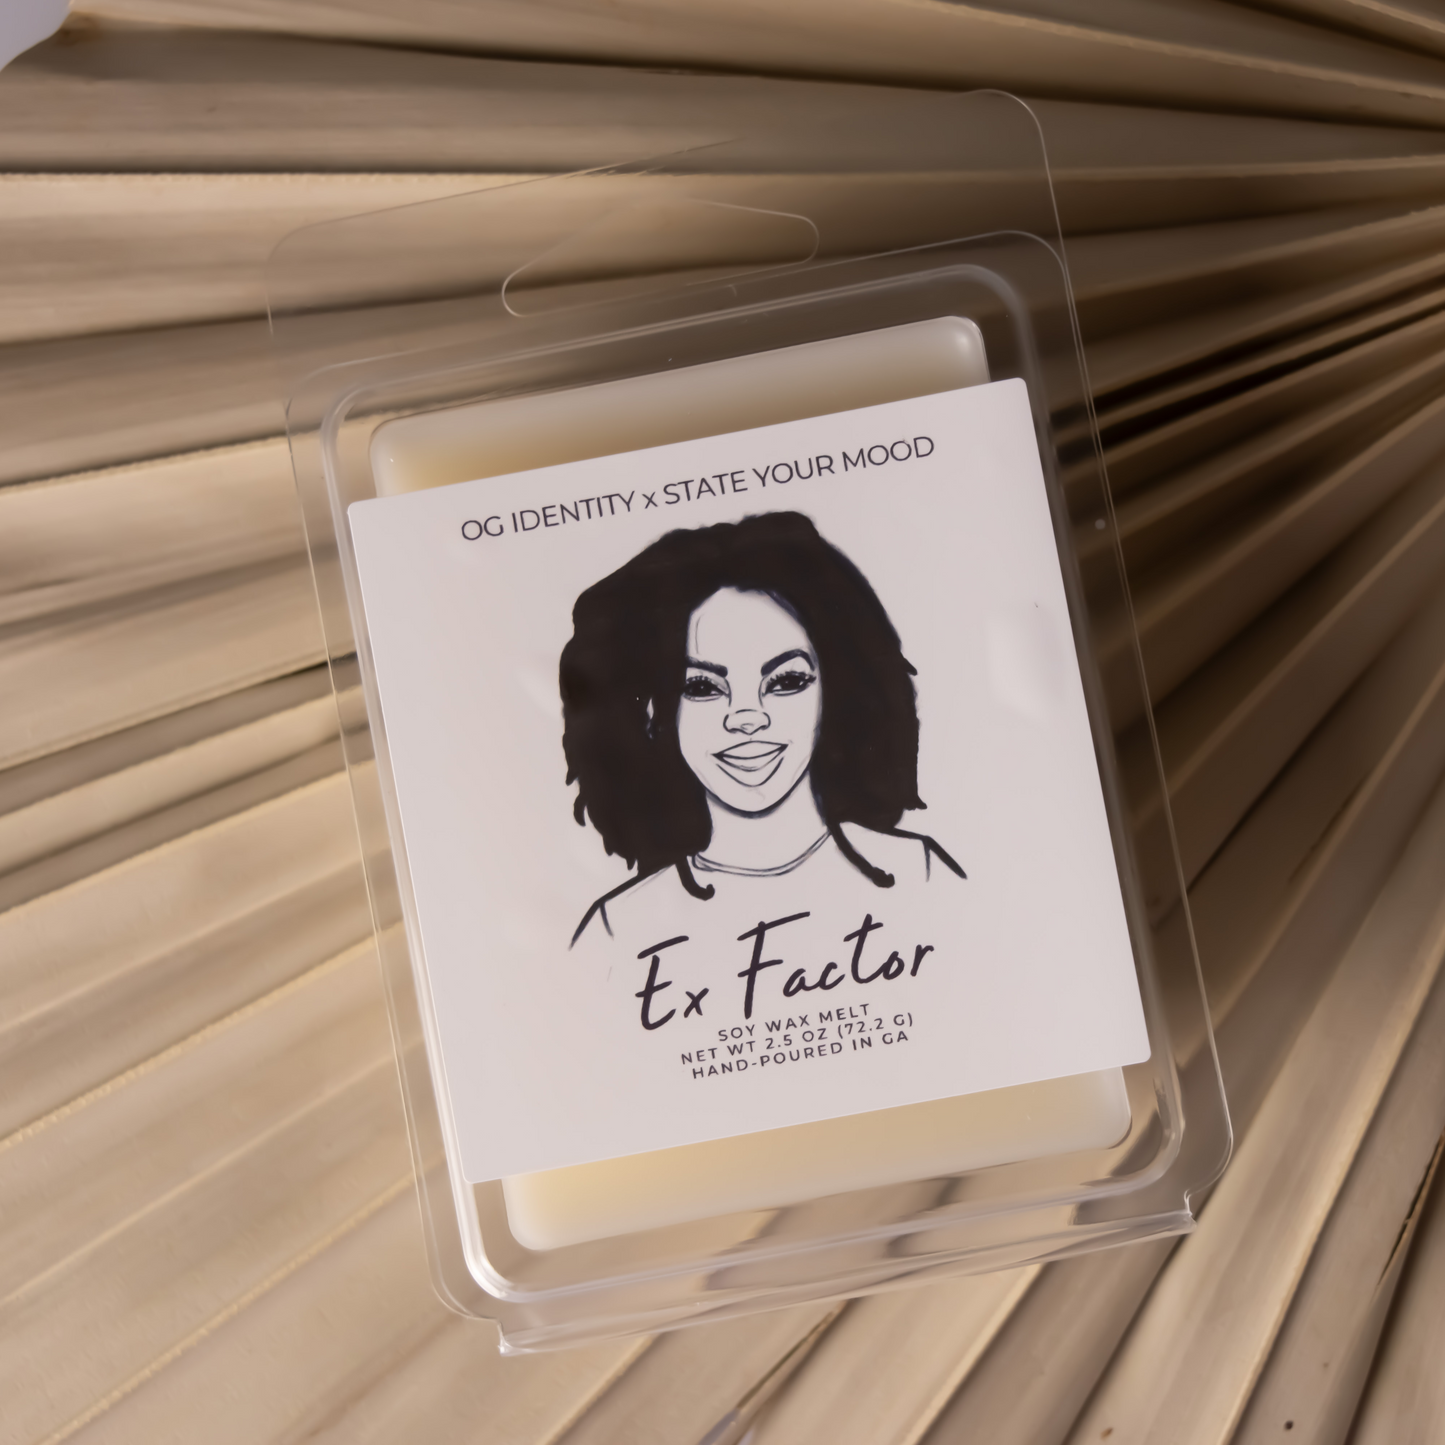 Ex Factor Wax Melts | Lauryn Hill Inspired | OG Identity X State Your Mood